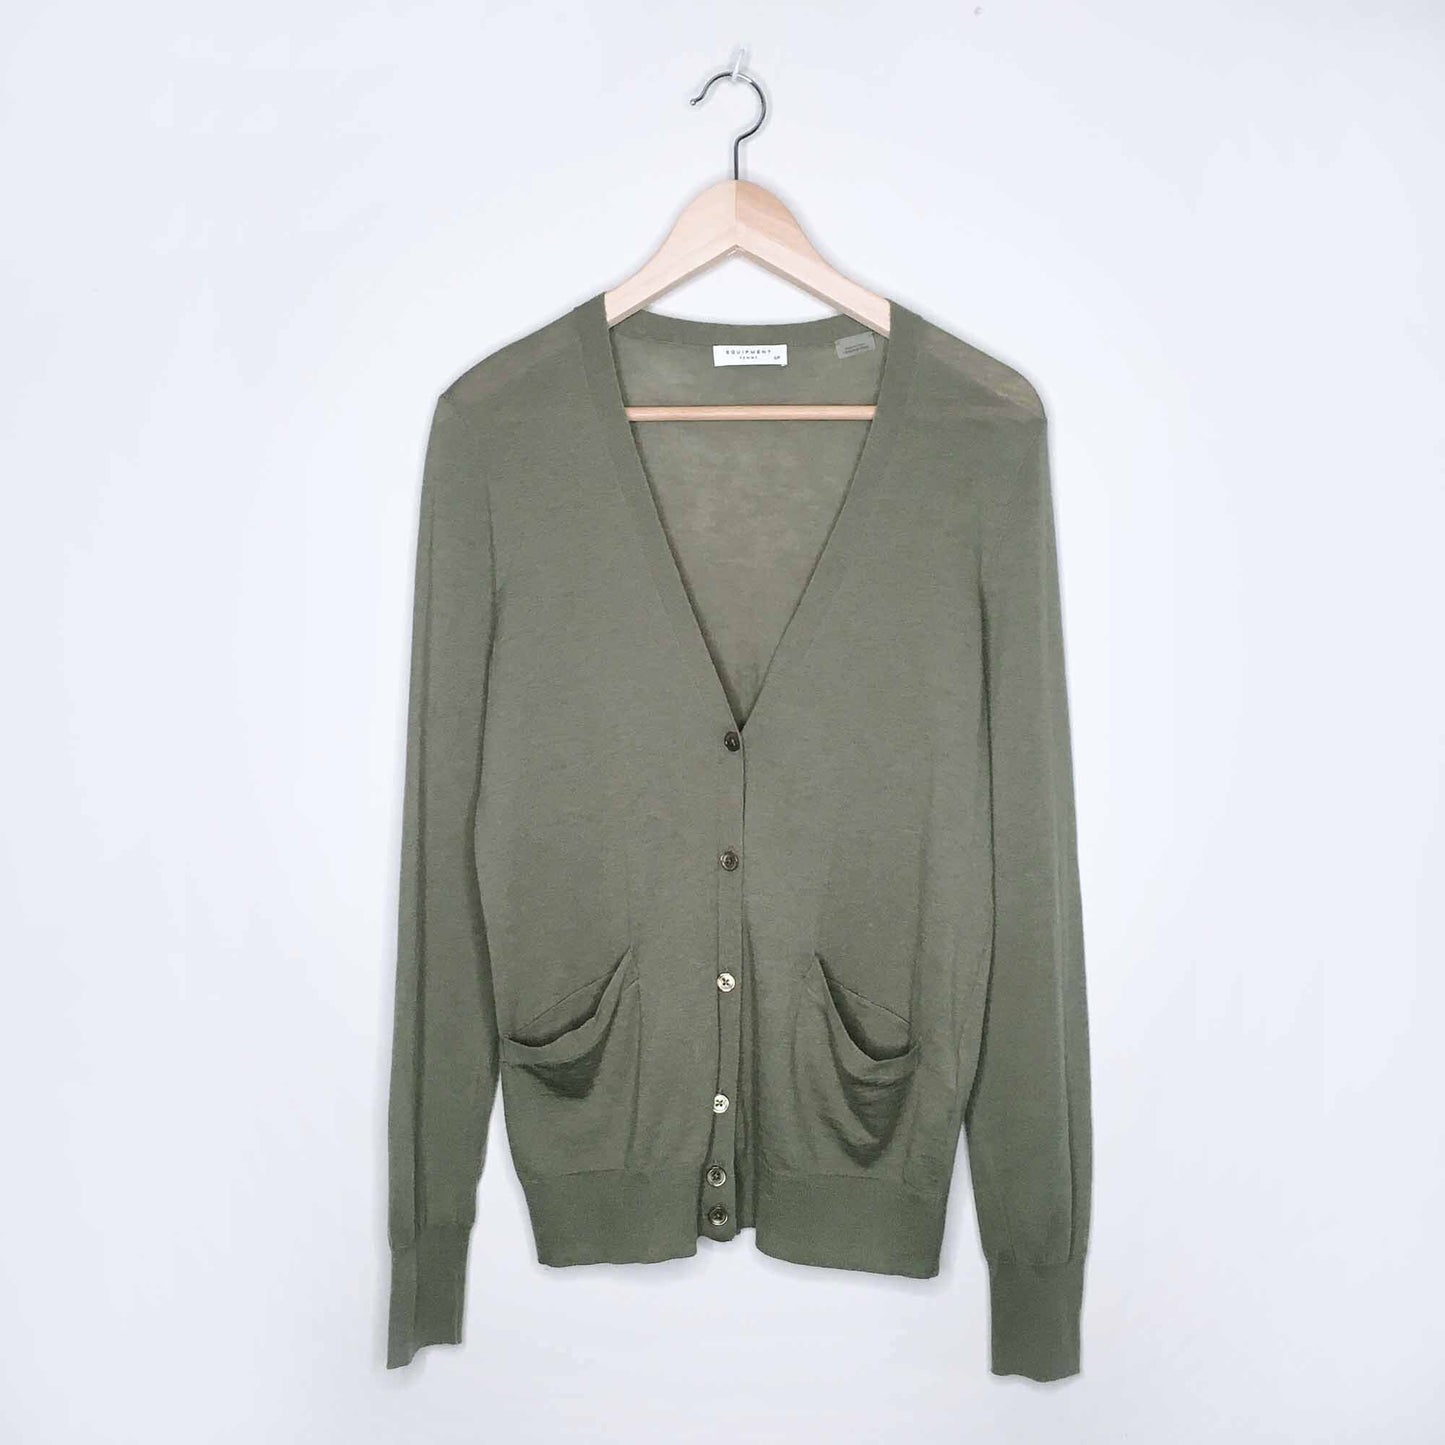 Equipment Femme wool-cashmere cardigan - size Small